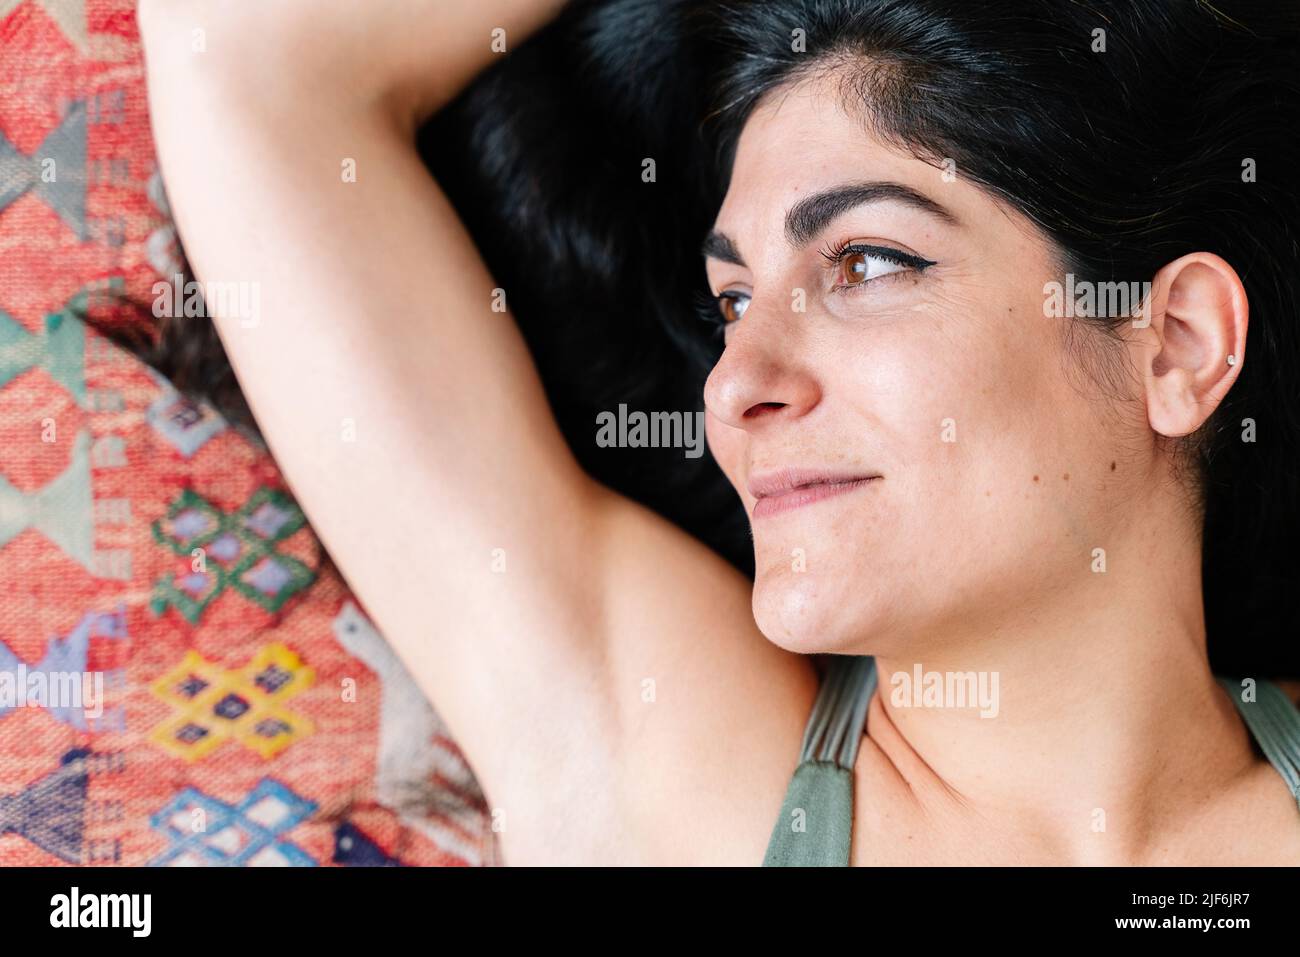 From above positive Hispanic woman with black hair and brown eyes raising arm and looking away with smile while relaxing on ornamental carpet in dayti Stock Photo